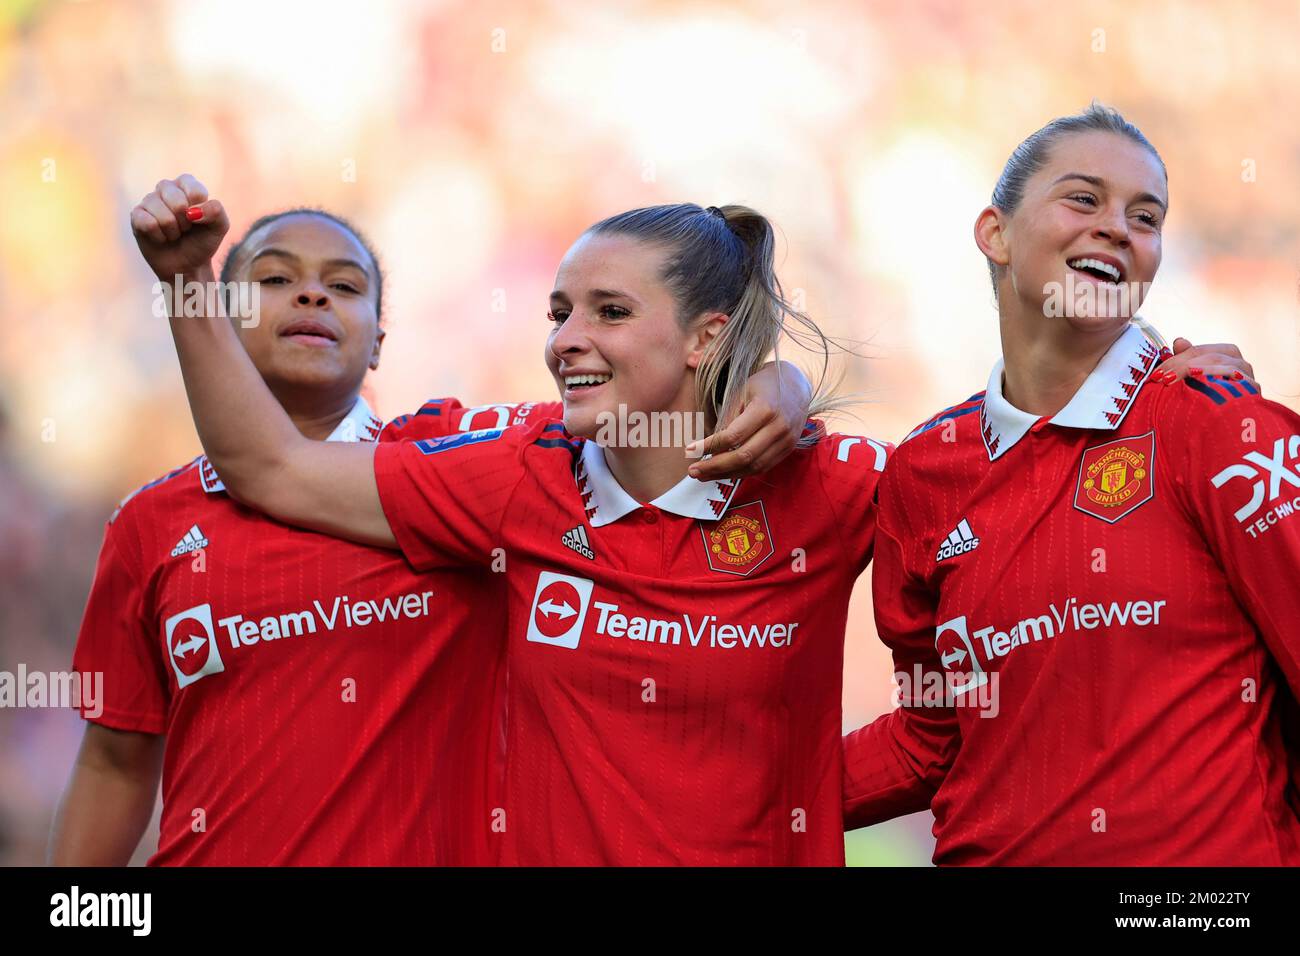 Ella Toone #7 of Manchester United celebrates the third goal scored by Alessia Russo #23 of Manchester United during The FA Women's Super League match Manchester United Women vs Aston Villa Women at Old Trafford, Manchester, United Kingdom, 3rd December 2022  (Photo by Conor Molloy/News Images) Stock Photo